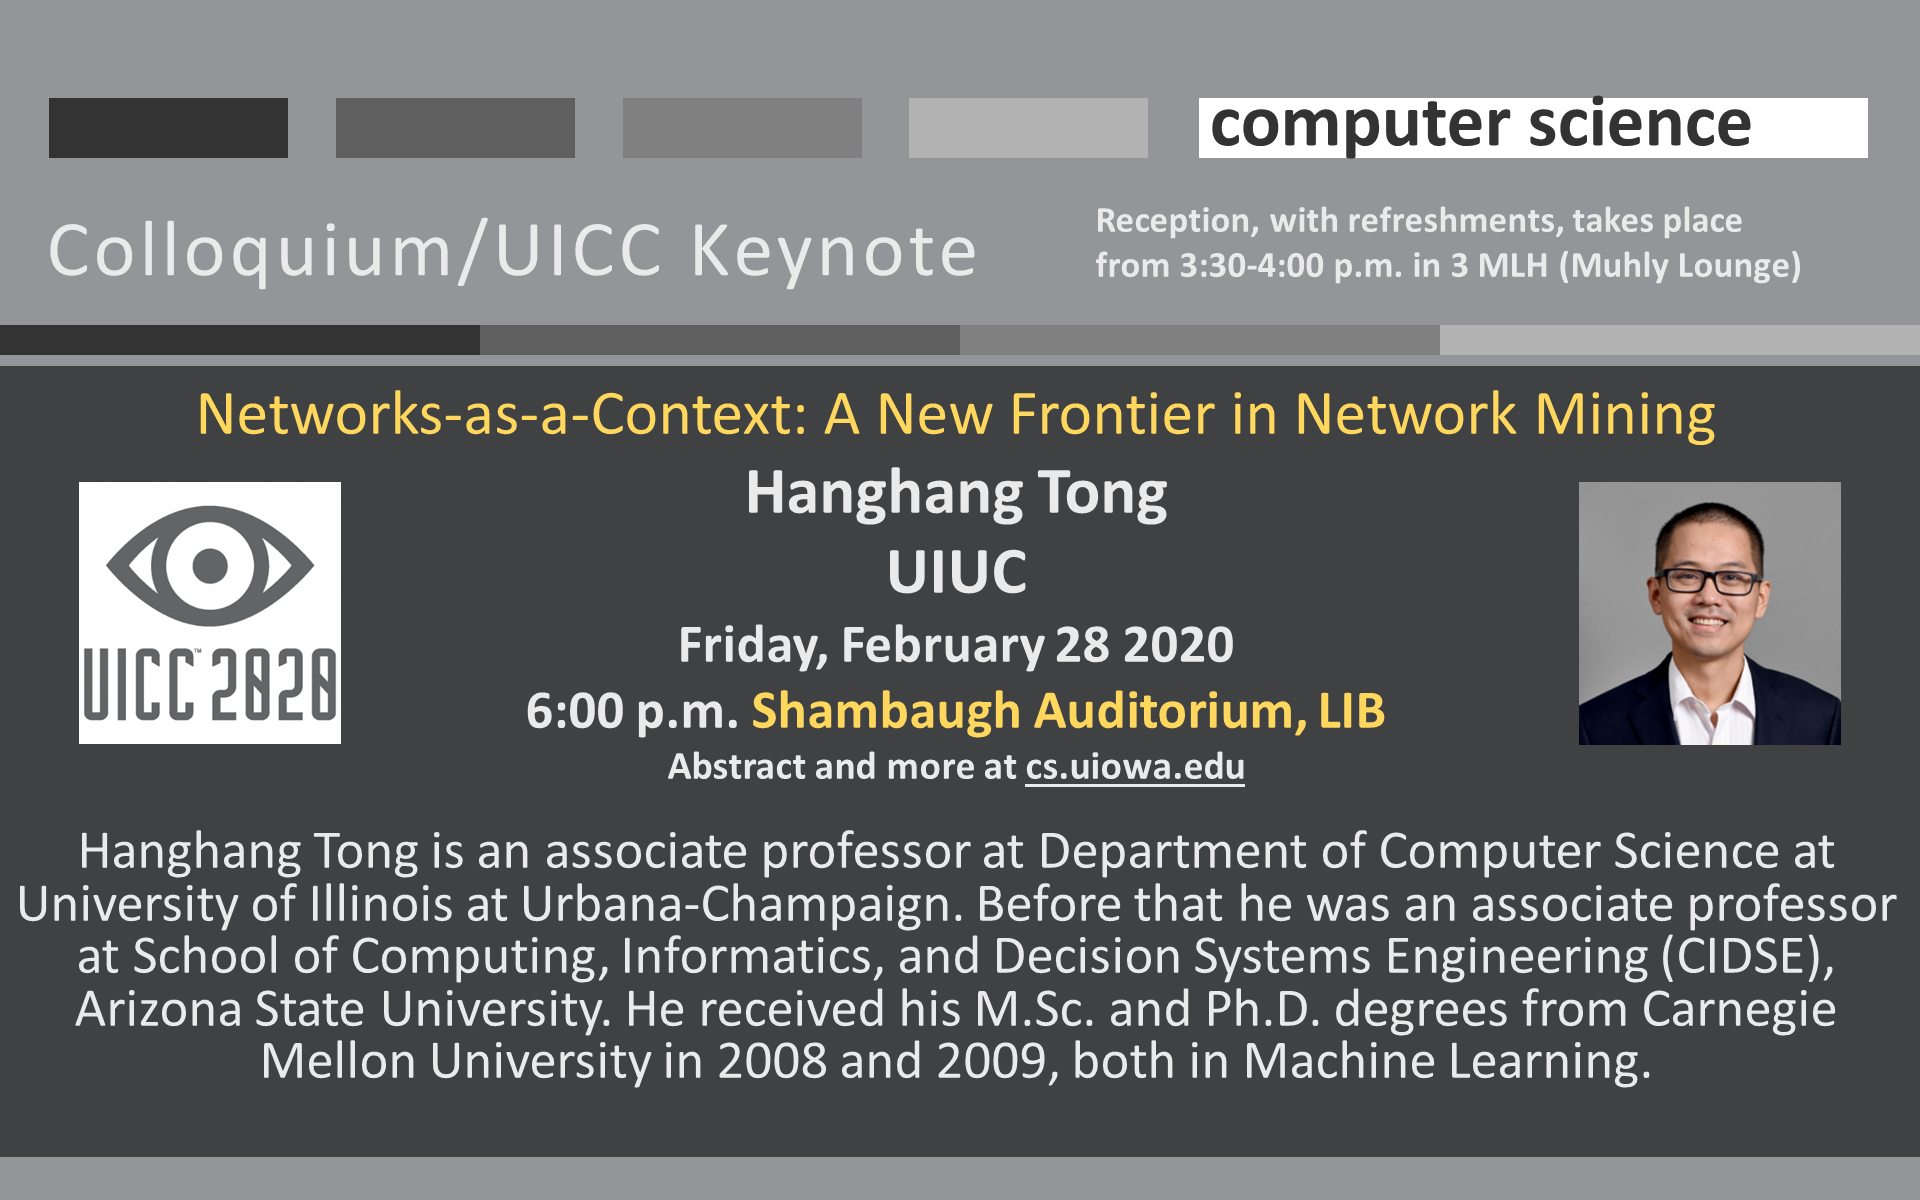 Networks-as-a-Context: A New Frontier in Network Mining Hanghang Tong  UIUC Friday, February 28 2020 6:00 p.m. Shambaugh Auditorium, LIB Abstract and more at cs.uiowa.edu  Hanghang Tong is an associate professor at Department of Computer Science at University of Illinois at Urbana-Champaign. Before that he was an associate professor at School of Computing, Informatics, and Decision Systems Engineering (CIDSE), Arizona State University. He received his M.Sc. and Ph.D. degrees from Carnegie Mellon University in 2008 and 2009, both in Machine Learning. 